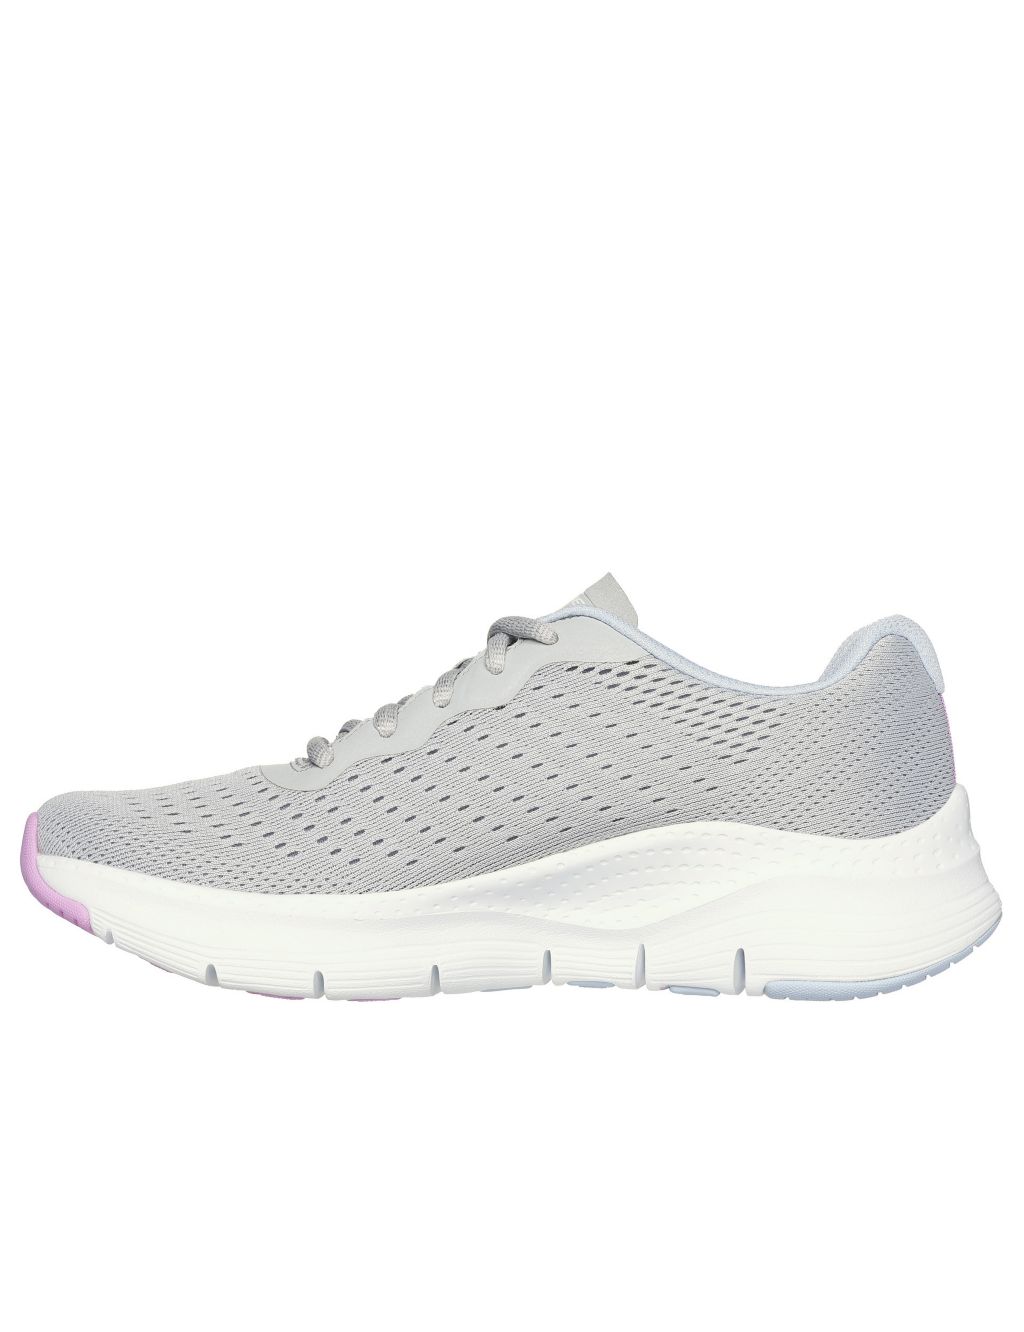 Arch Fit™ Infinity Lace Up Mesh Trainers image 5